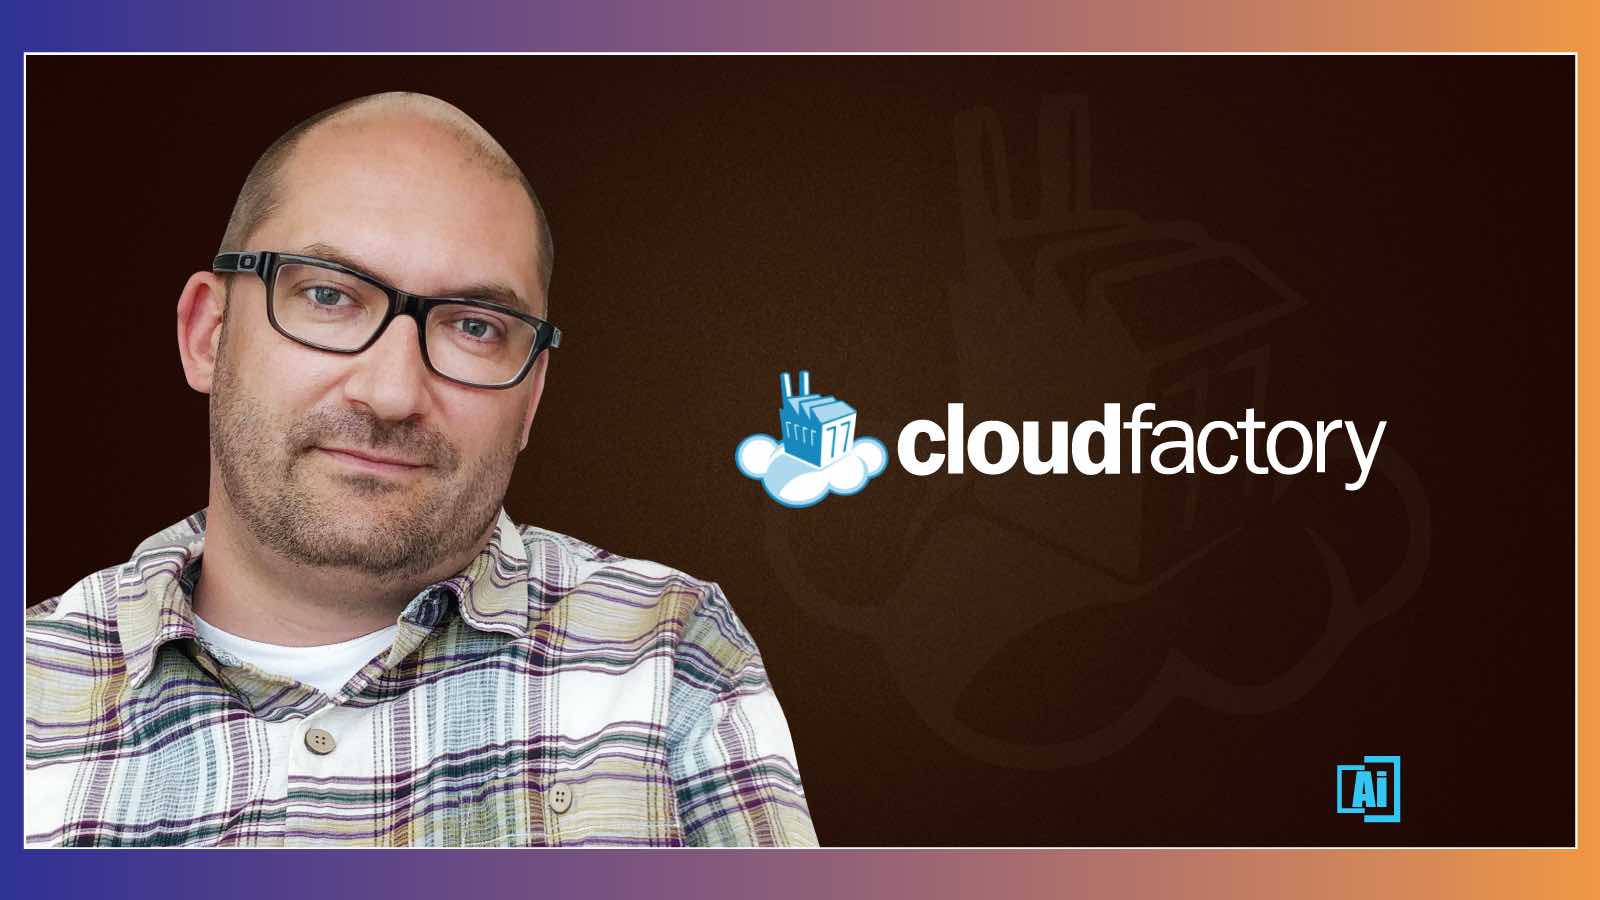  CloudFactory secures £50.31 million Series C investment led by FTV Capital